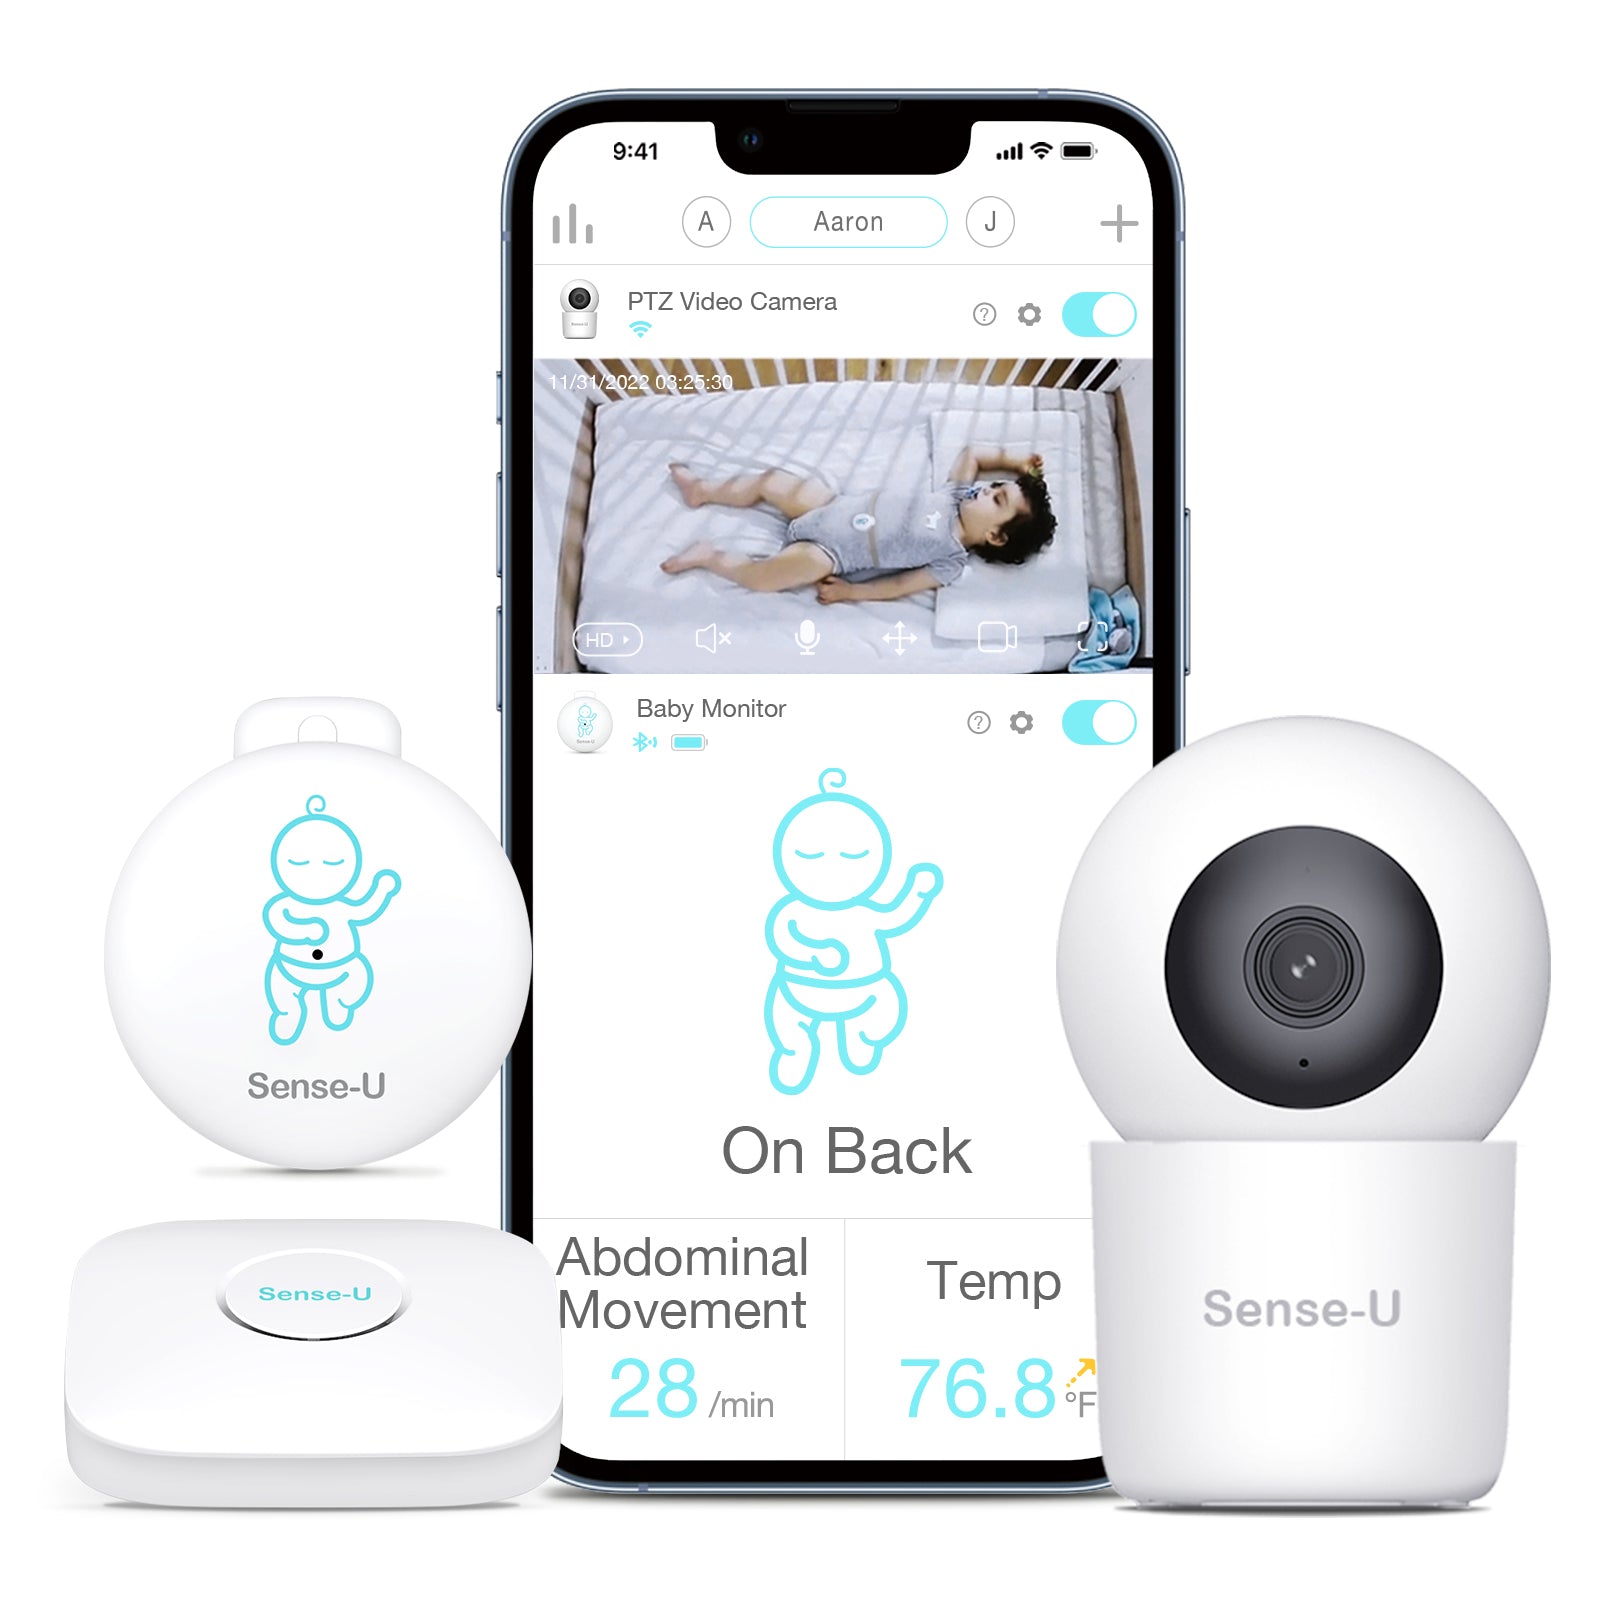 Sense-U Bundle: Know your child is okay while streaming HD video, anytime,  anywhere